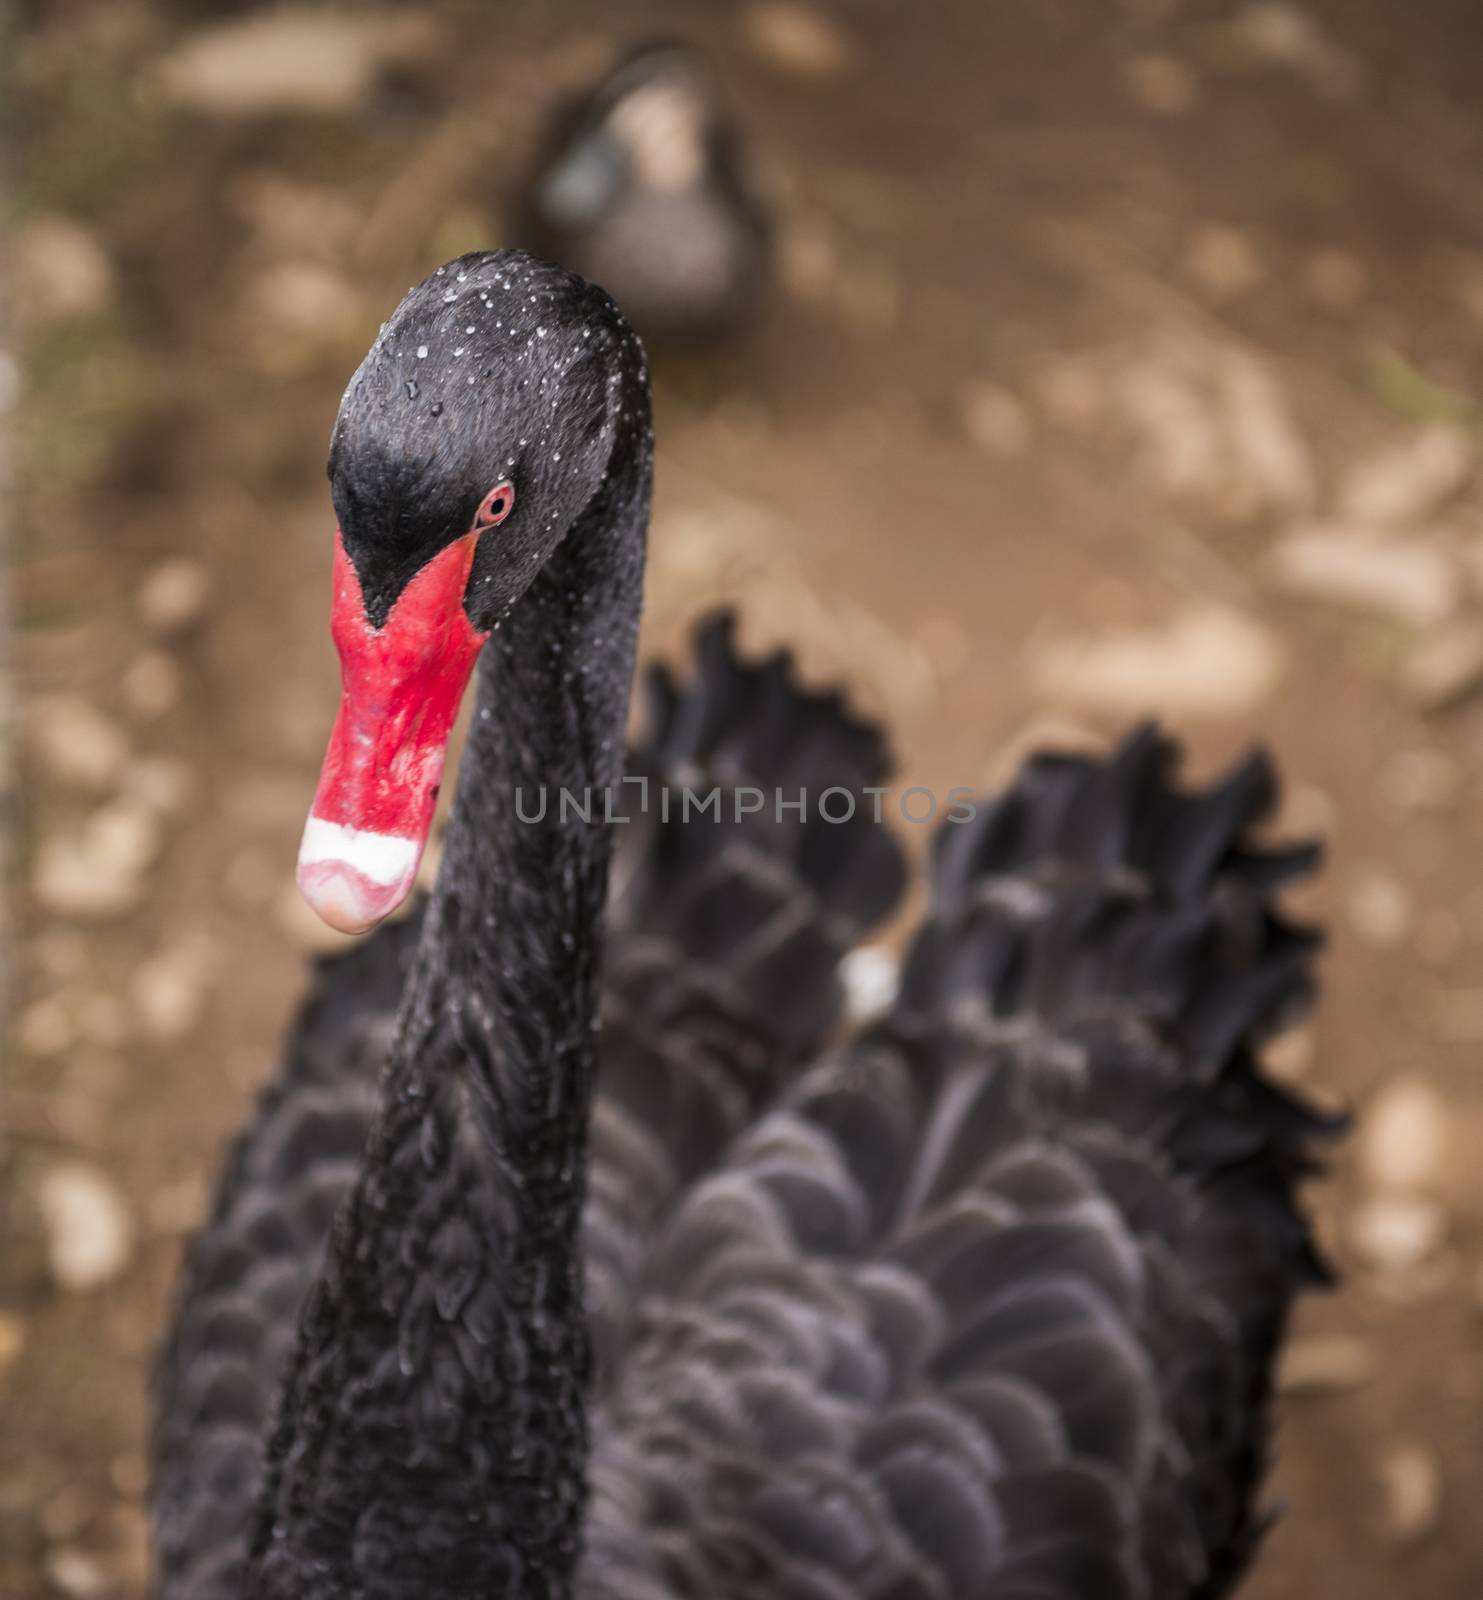 Black swan outdoors during the day standing